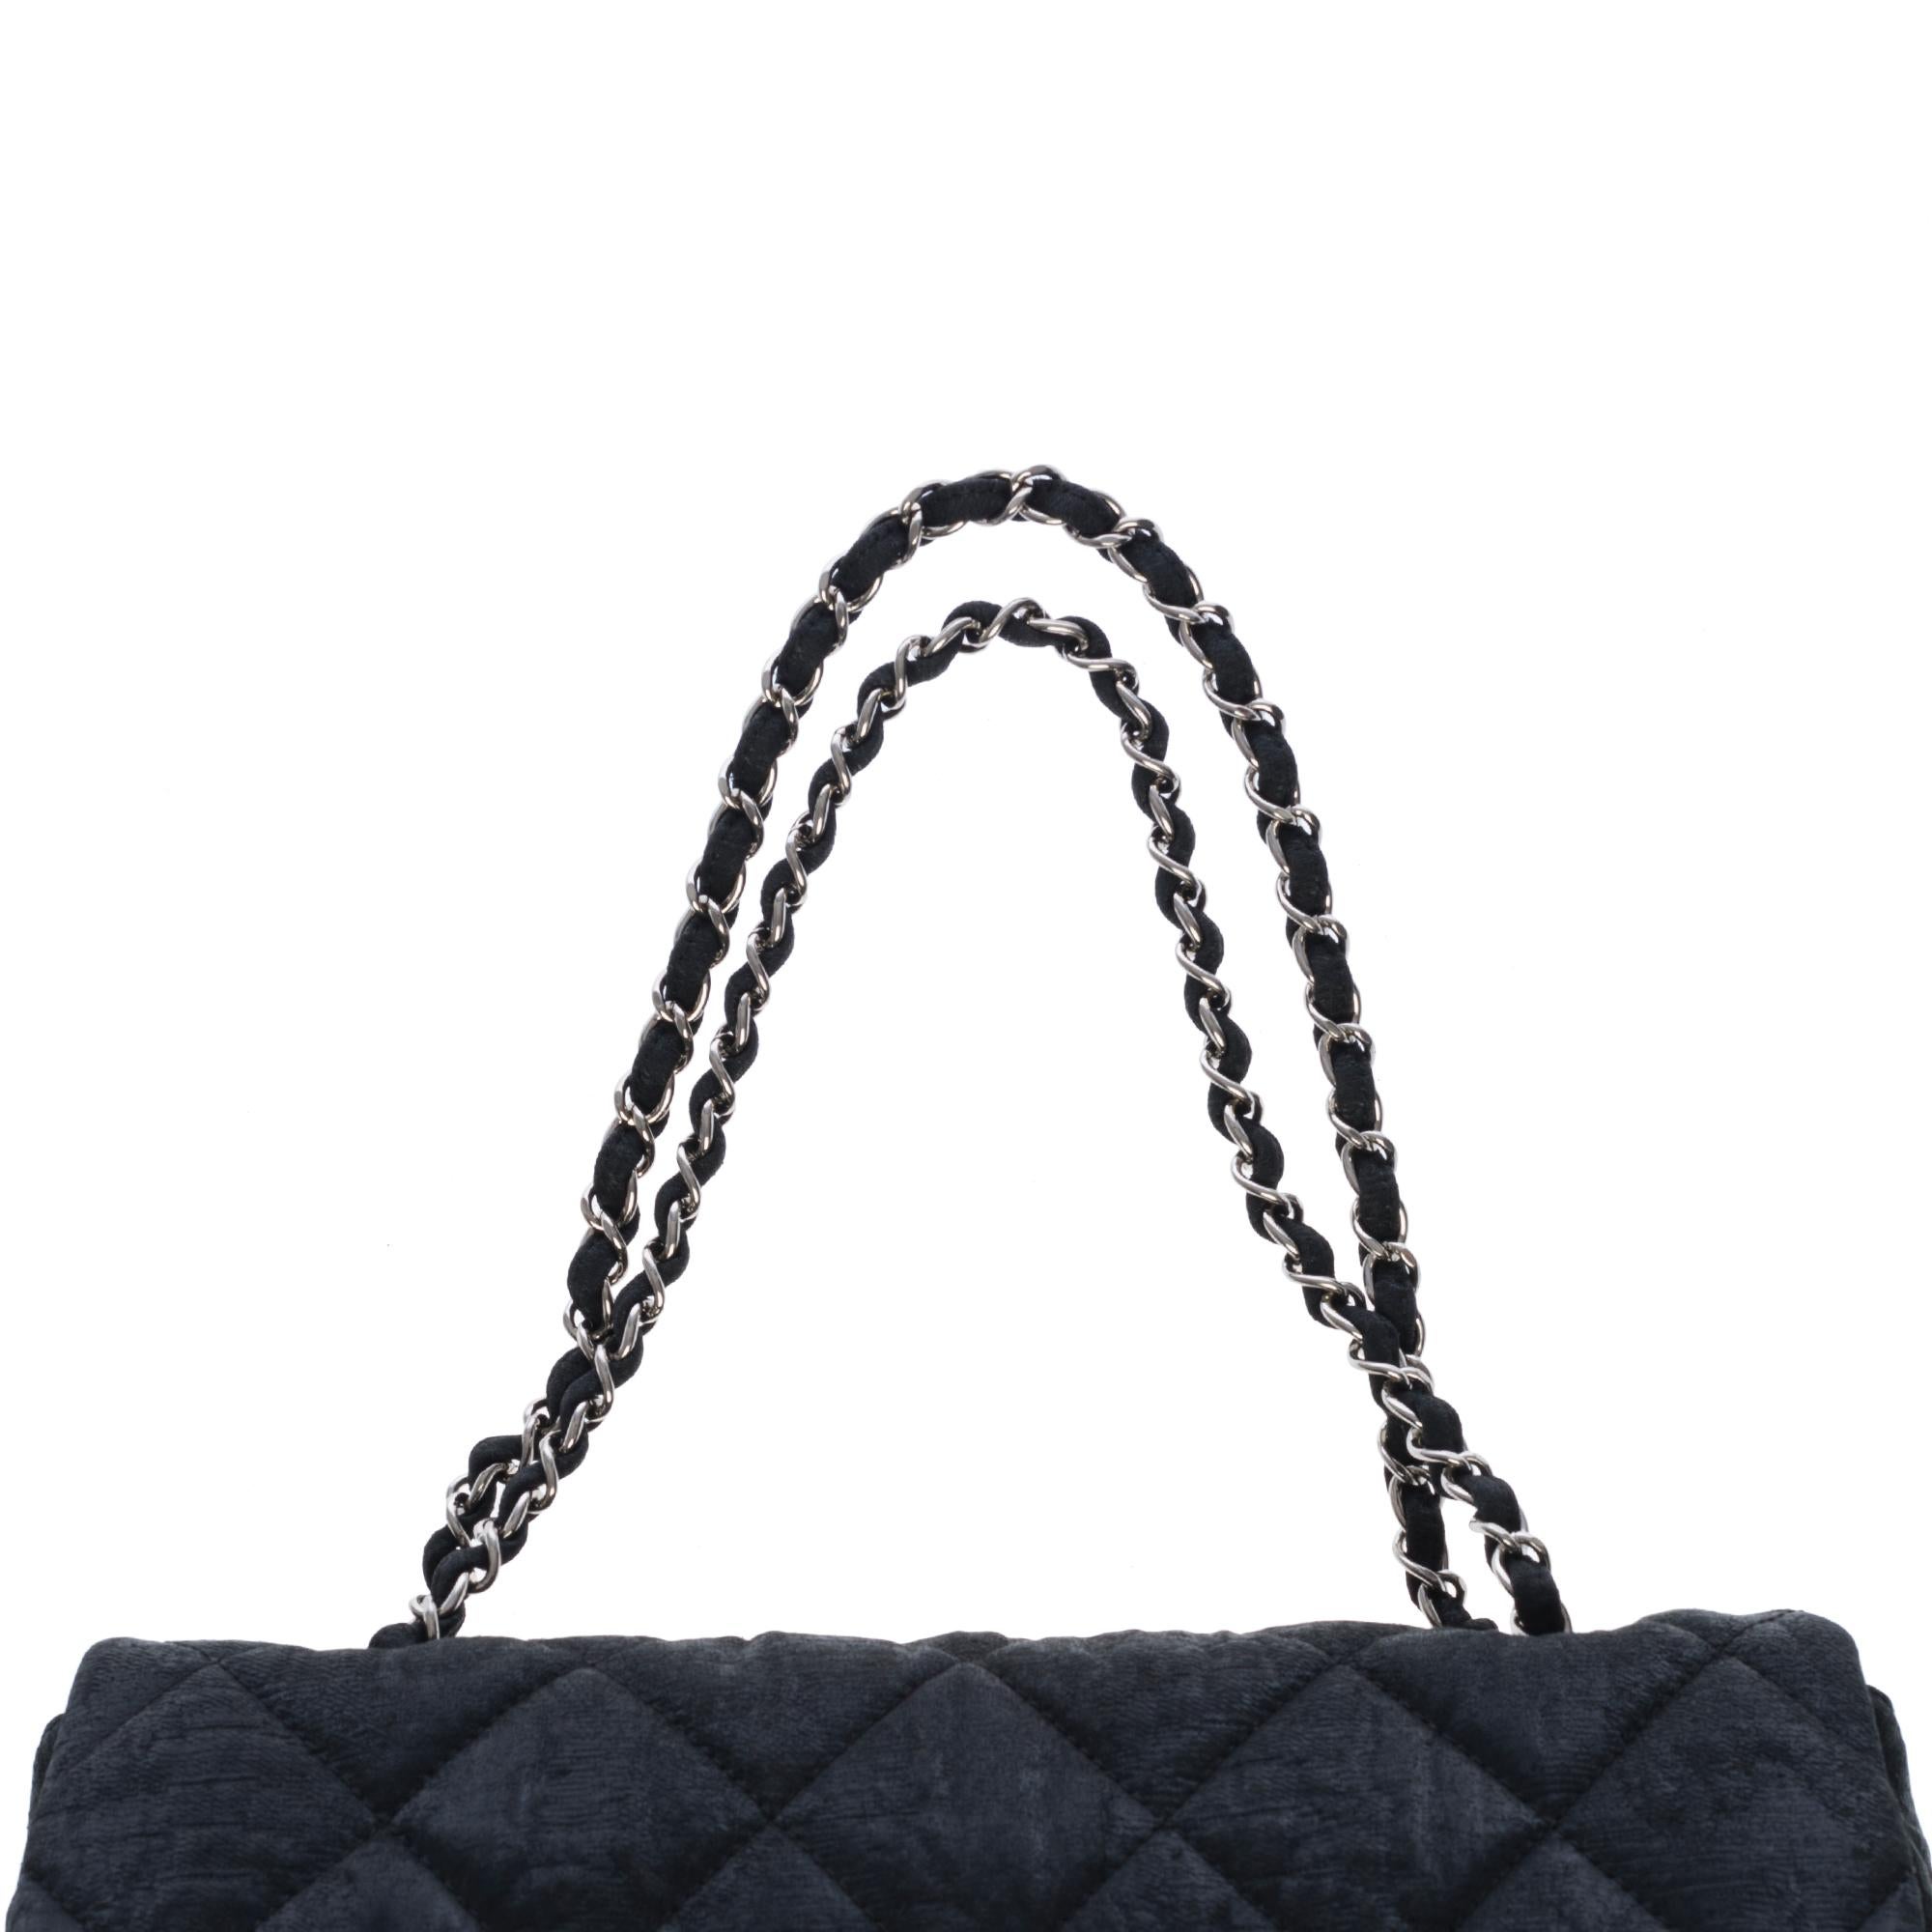 Women's Chanel Classic Flap bag shoulder bag in black quilted fabric and silver hardware